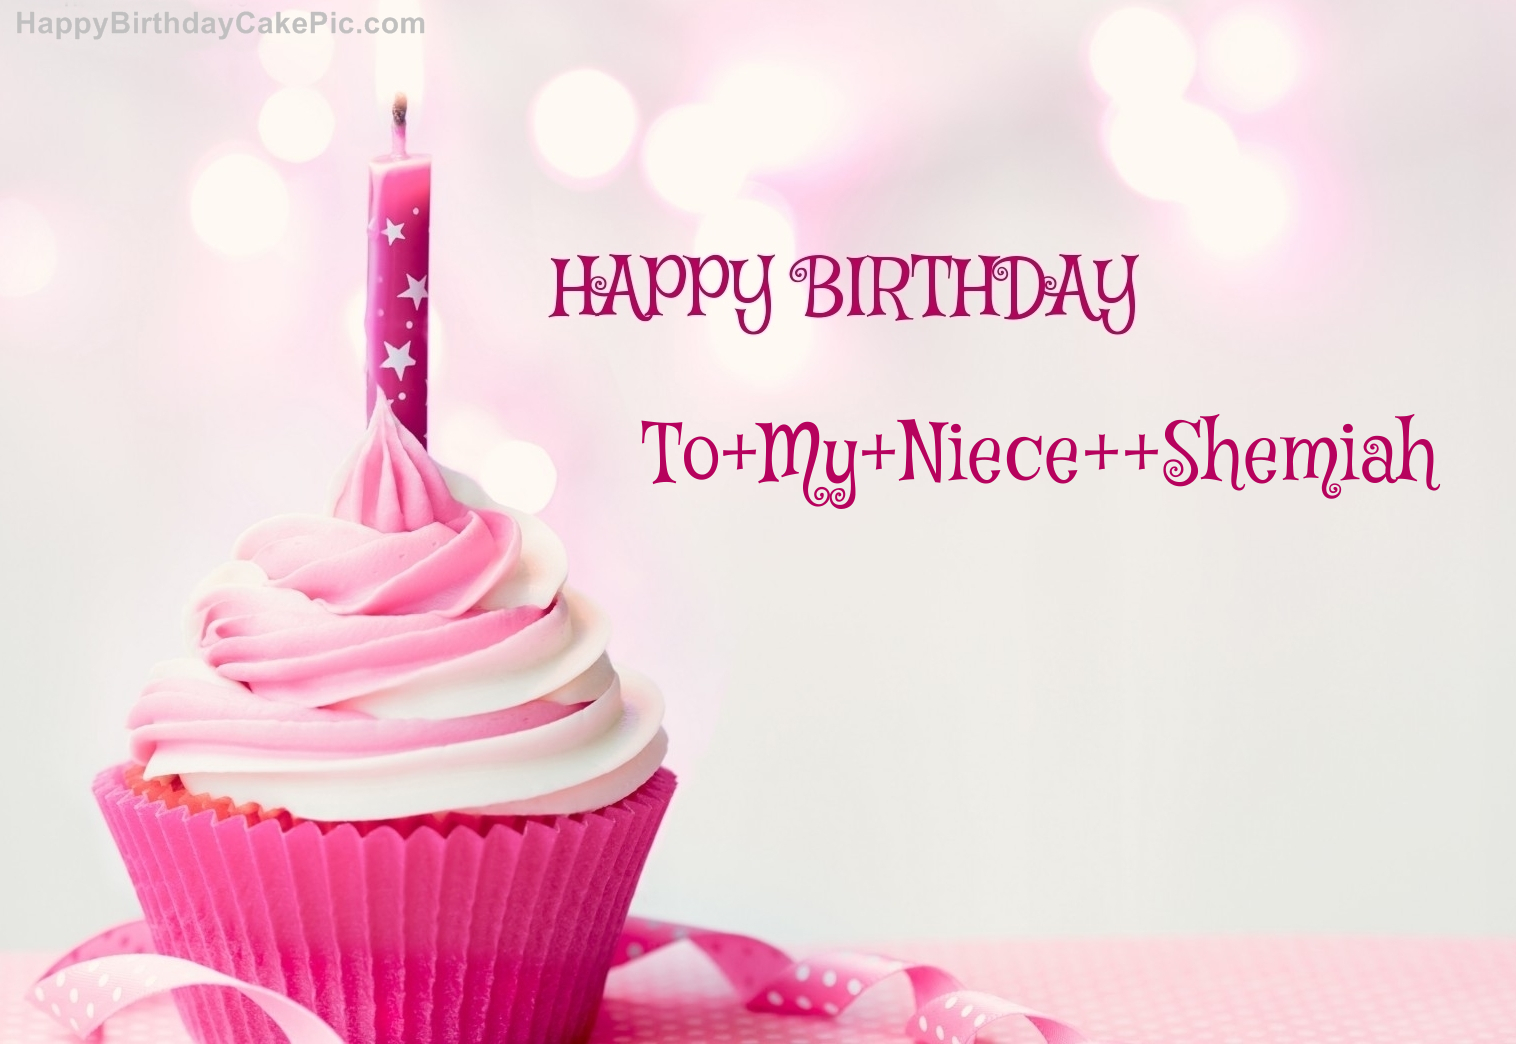 Happy Birthday Cupcake Candle Pink Cake For To My Niece Shemiah